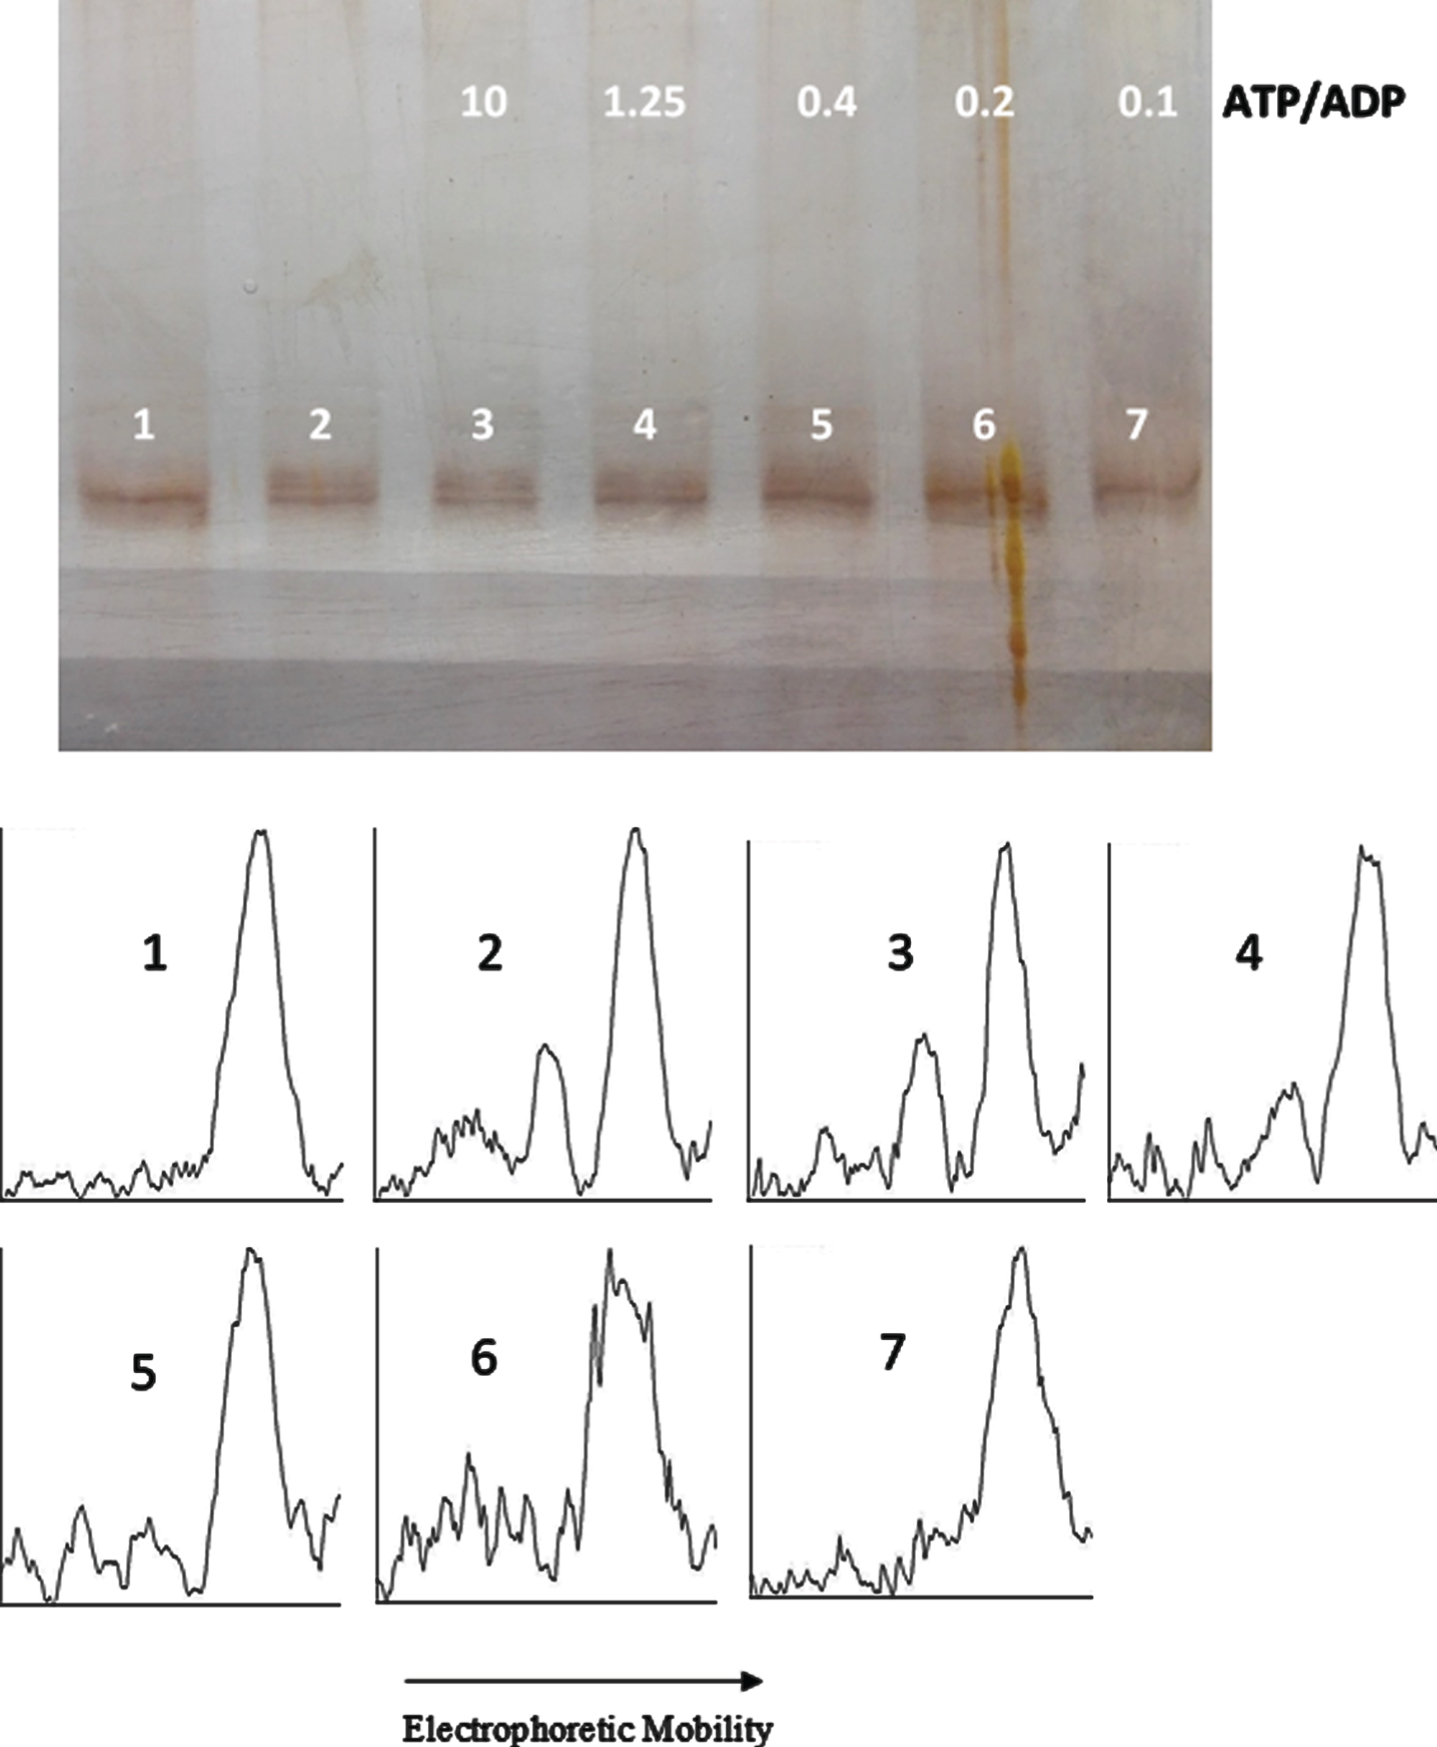 ATP/ADP ratio-dependency of tau protein phosphorylation as probed by electrophoretic mobility. The mixture of tau protein and C-PKA prepared as described in Materials and Method (Tau-C-PKA) was diluted 1/10 in a buffer composed of 35 μl of 10 mM Hepes and 0.1 M NaCl at pH 7, and 23 μl of phosphate buffer containing 250 mM phosphate and 0.1 mg/ml Ampicillin at pH 7. This reaction mixture contained 13 mM MgCl2, 0.22 mM EGTA, 0.25 mM 2-mercaptoethanol, 0.87 mM ATP and the following ADP concentrations (mM): 0 (lane 2), 0.087 (lane 3), 0.7 (lane 4), 2.2 (lane 5), 4.4 (lane 6), and 8.7 (lane 7). Lane 1 is a control in the absence of nucleotides. All samples were incubated at 20°C for 22 h. The rolling ball radius used for subtraction of background was of 30 pixels.